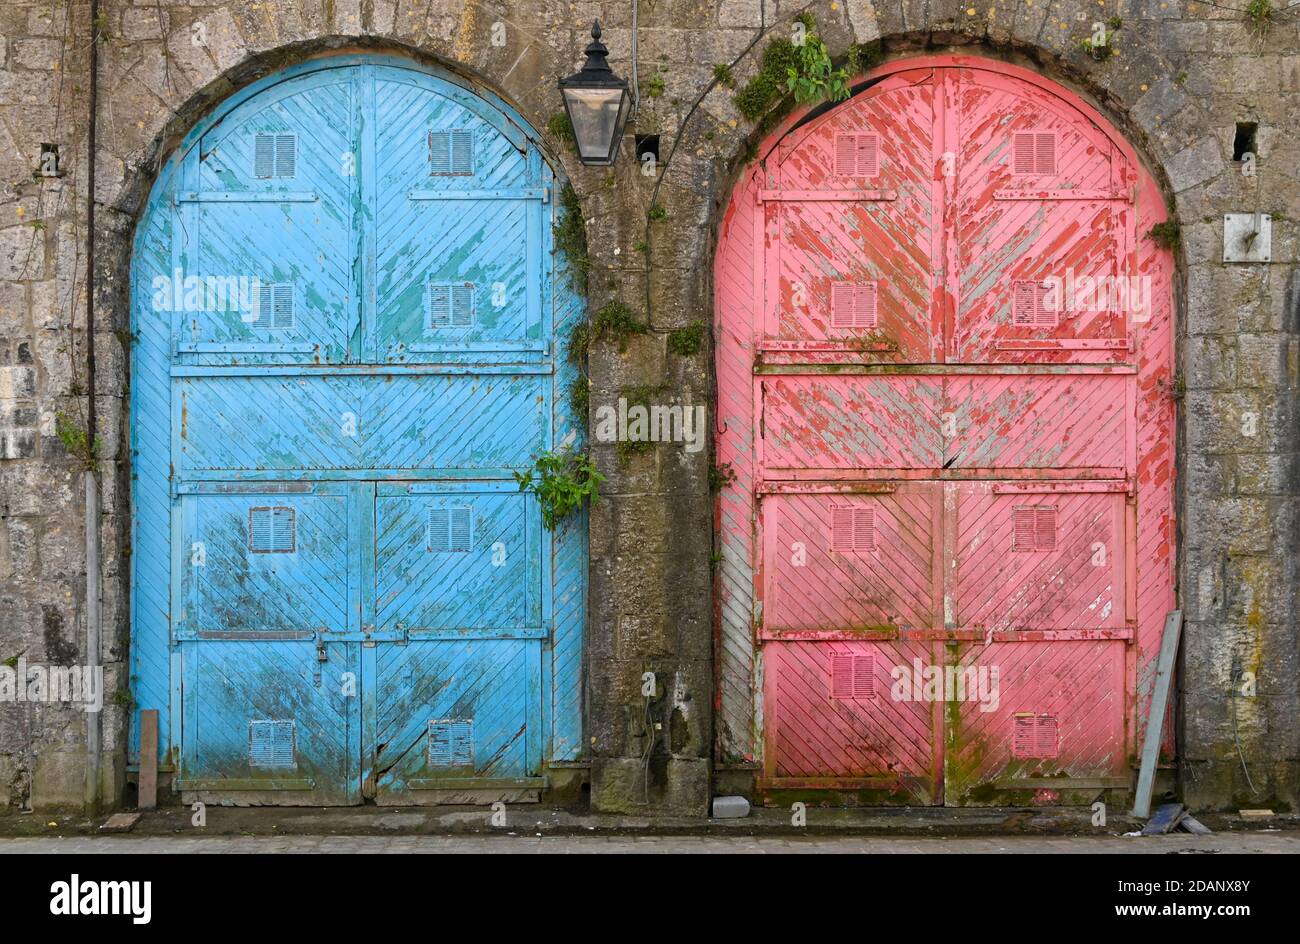 Pair of large  colourful old doors with peeling paint set in a stone building. Stock Photo